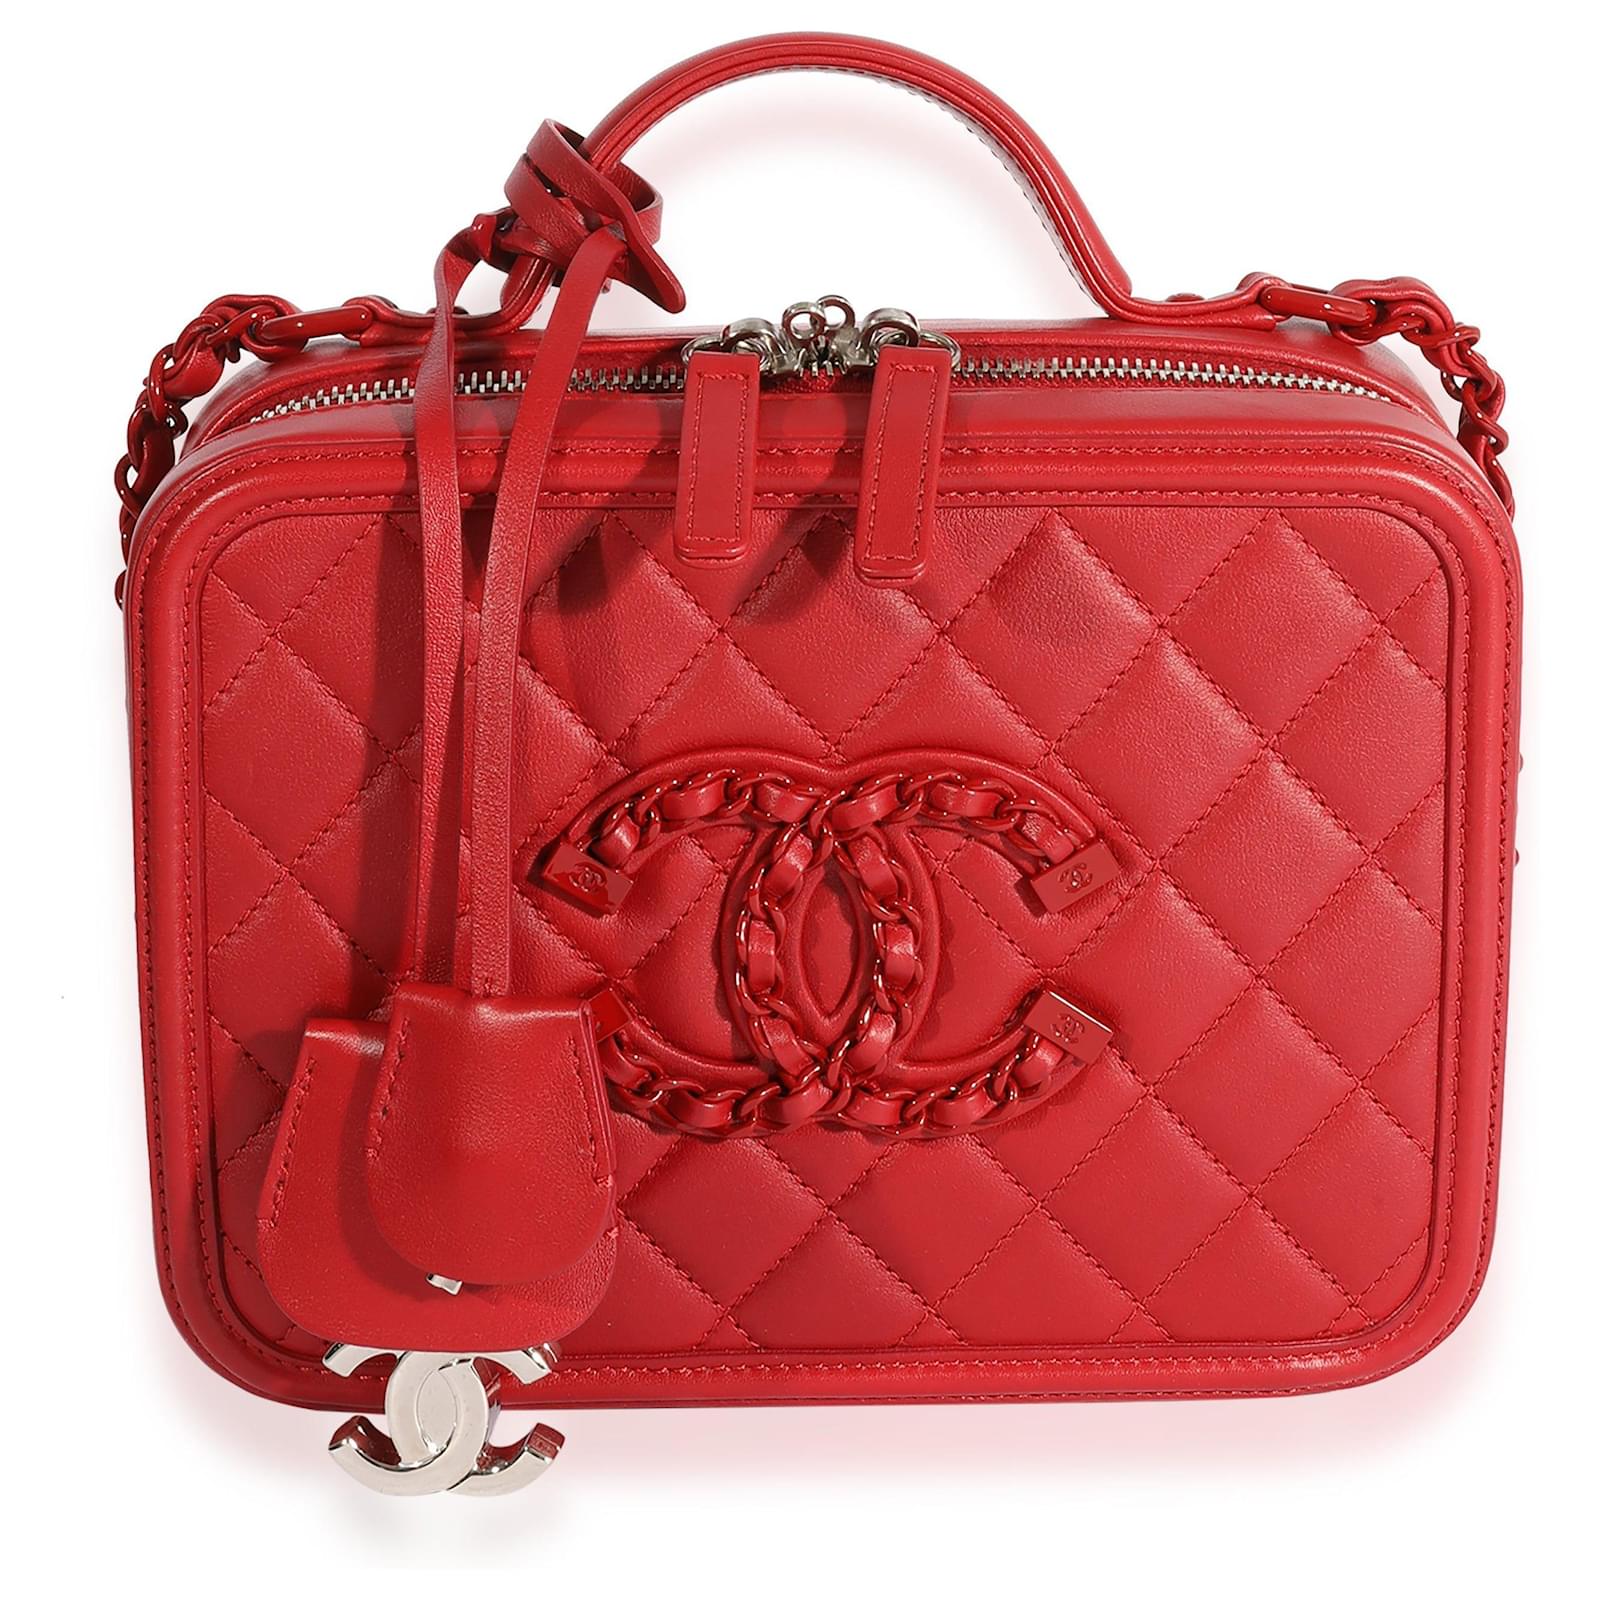 Chanel Red Quilted Lambskin Medium Filigree Vanity Case Leather